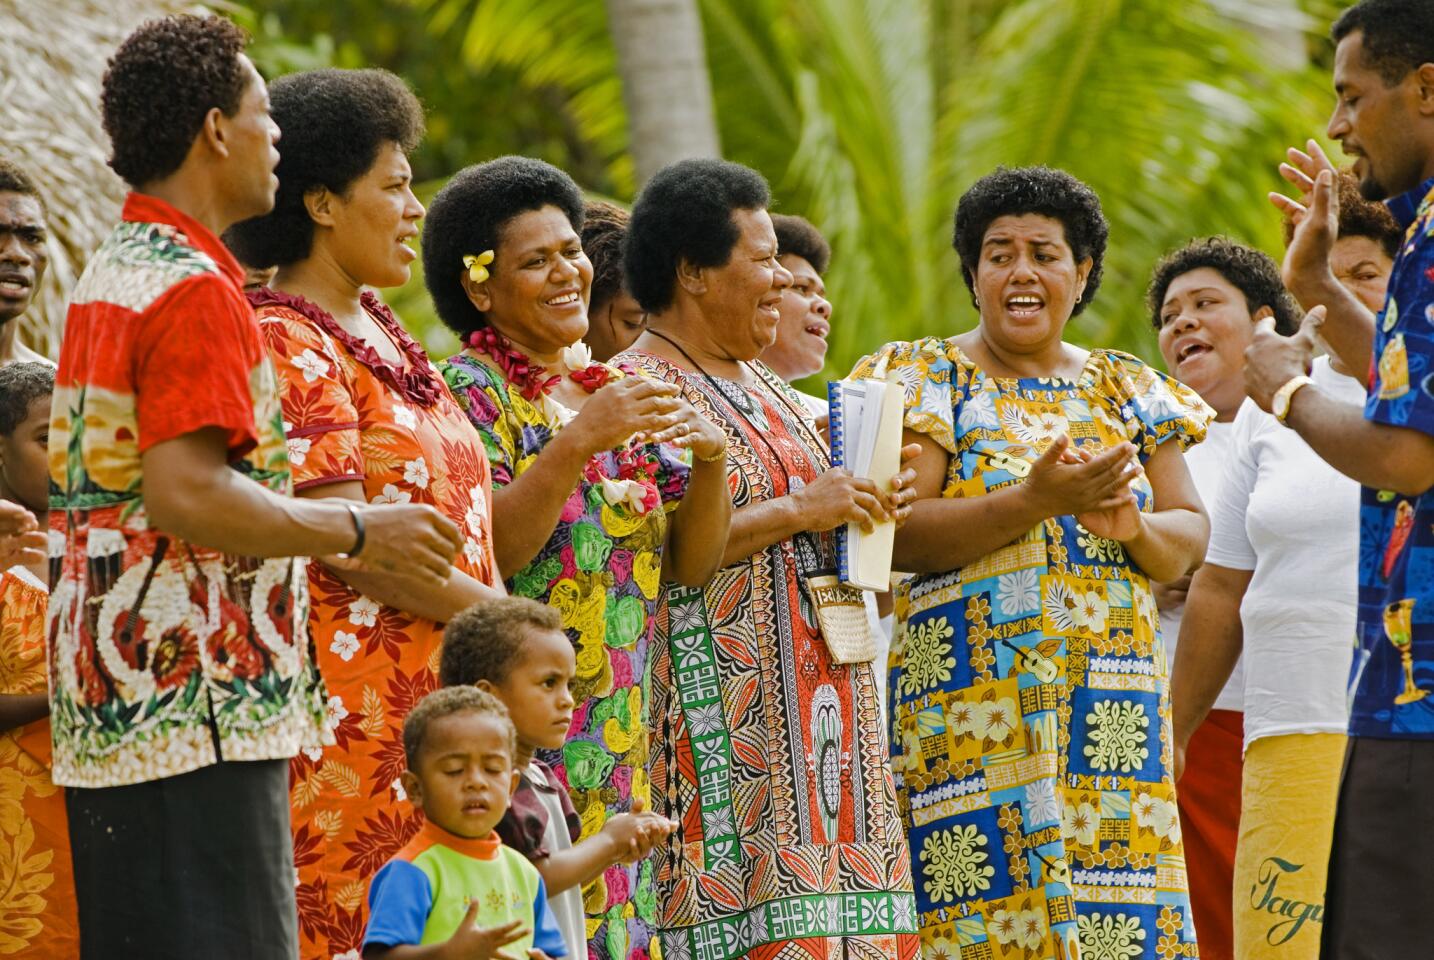 Dravuni women singing a welcome to Cruise ship passengers on their arrival to Kadavu Island in Fiji.